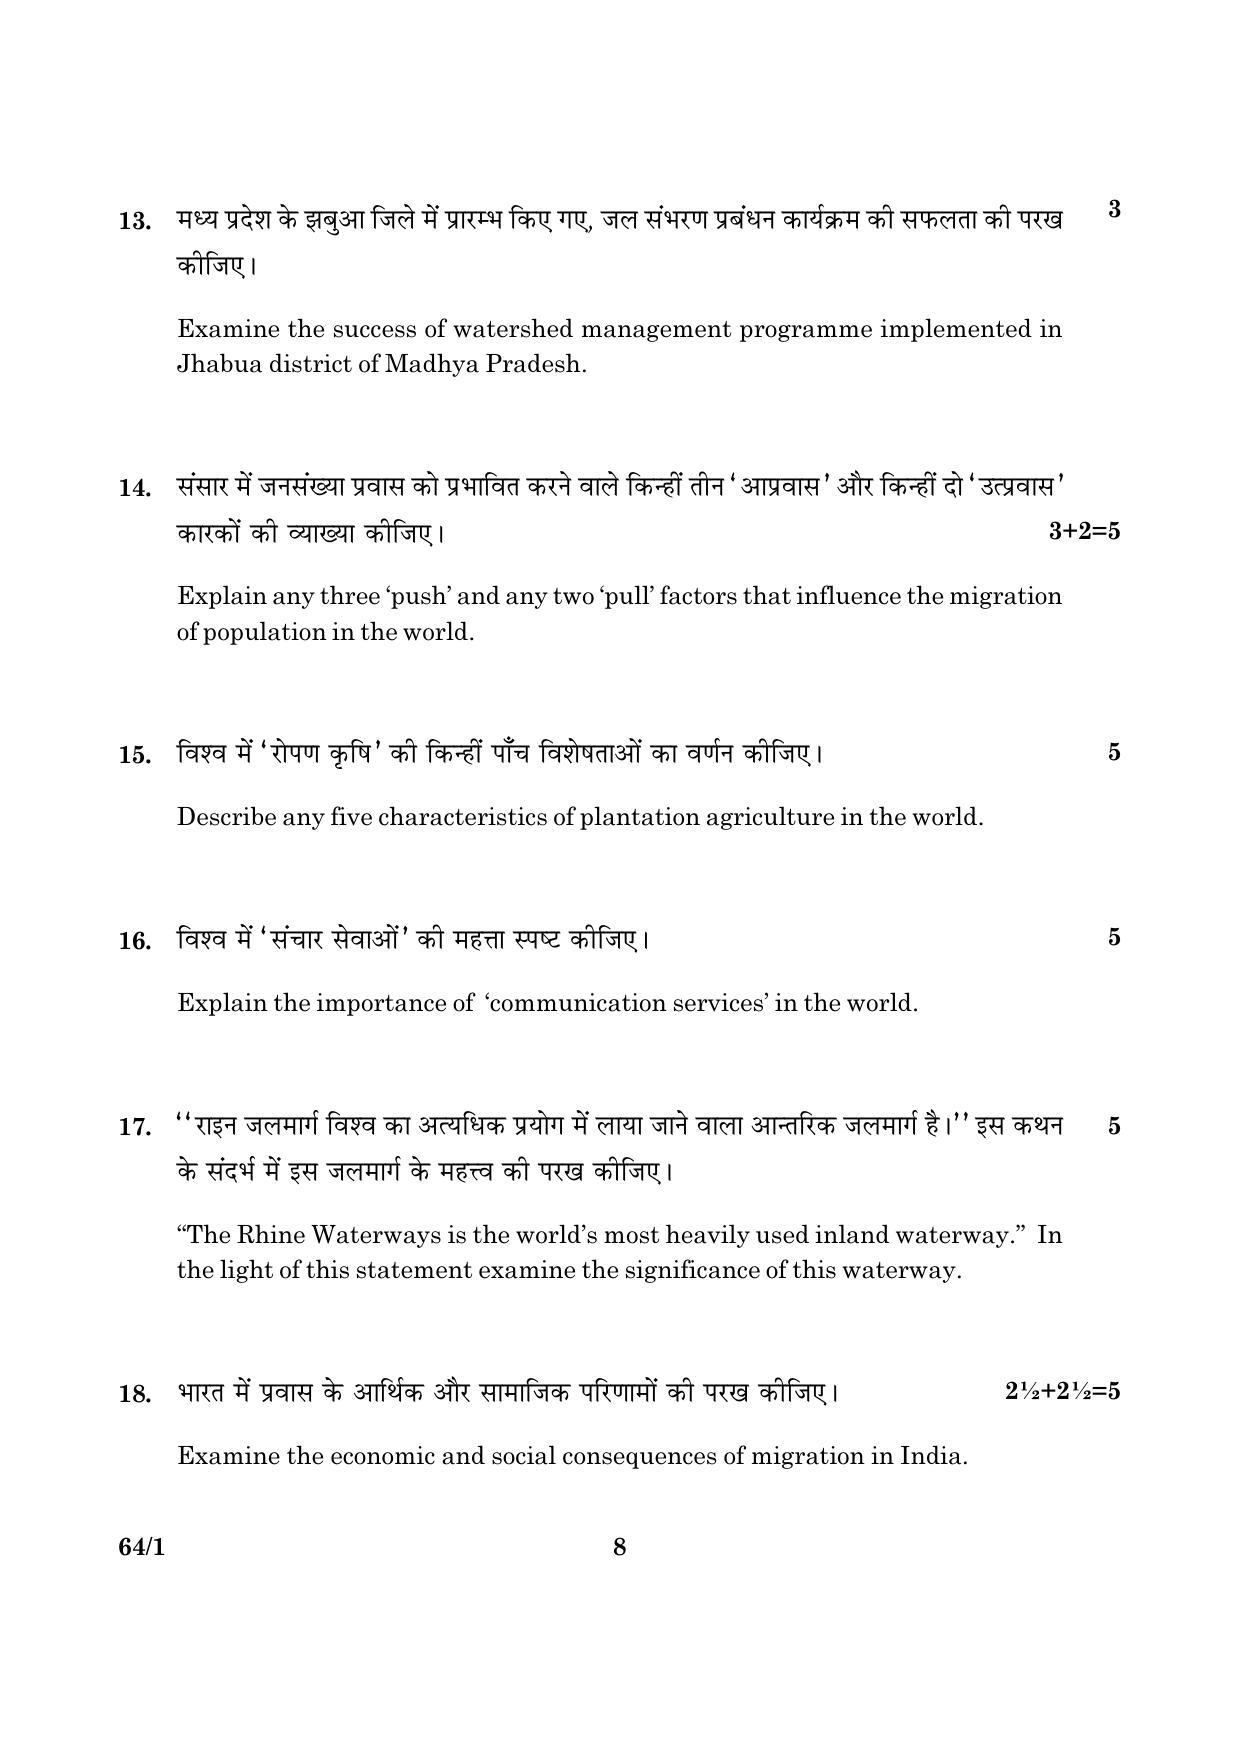 CBSE Class 12 064 Set 1 Geography 2016 Question Paper - Page 8